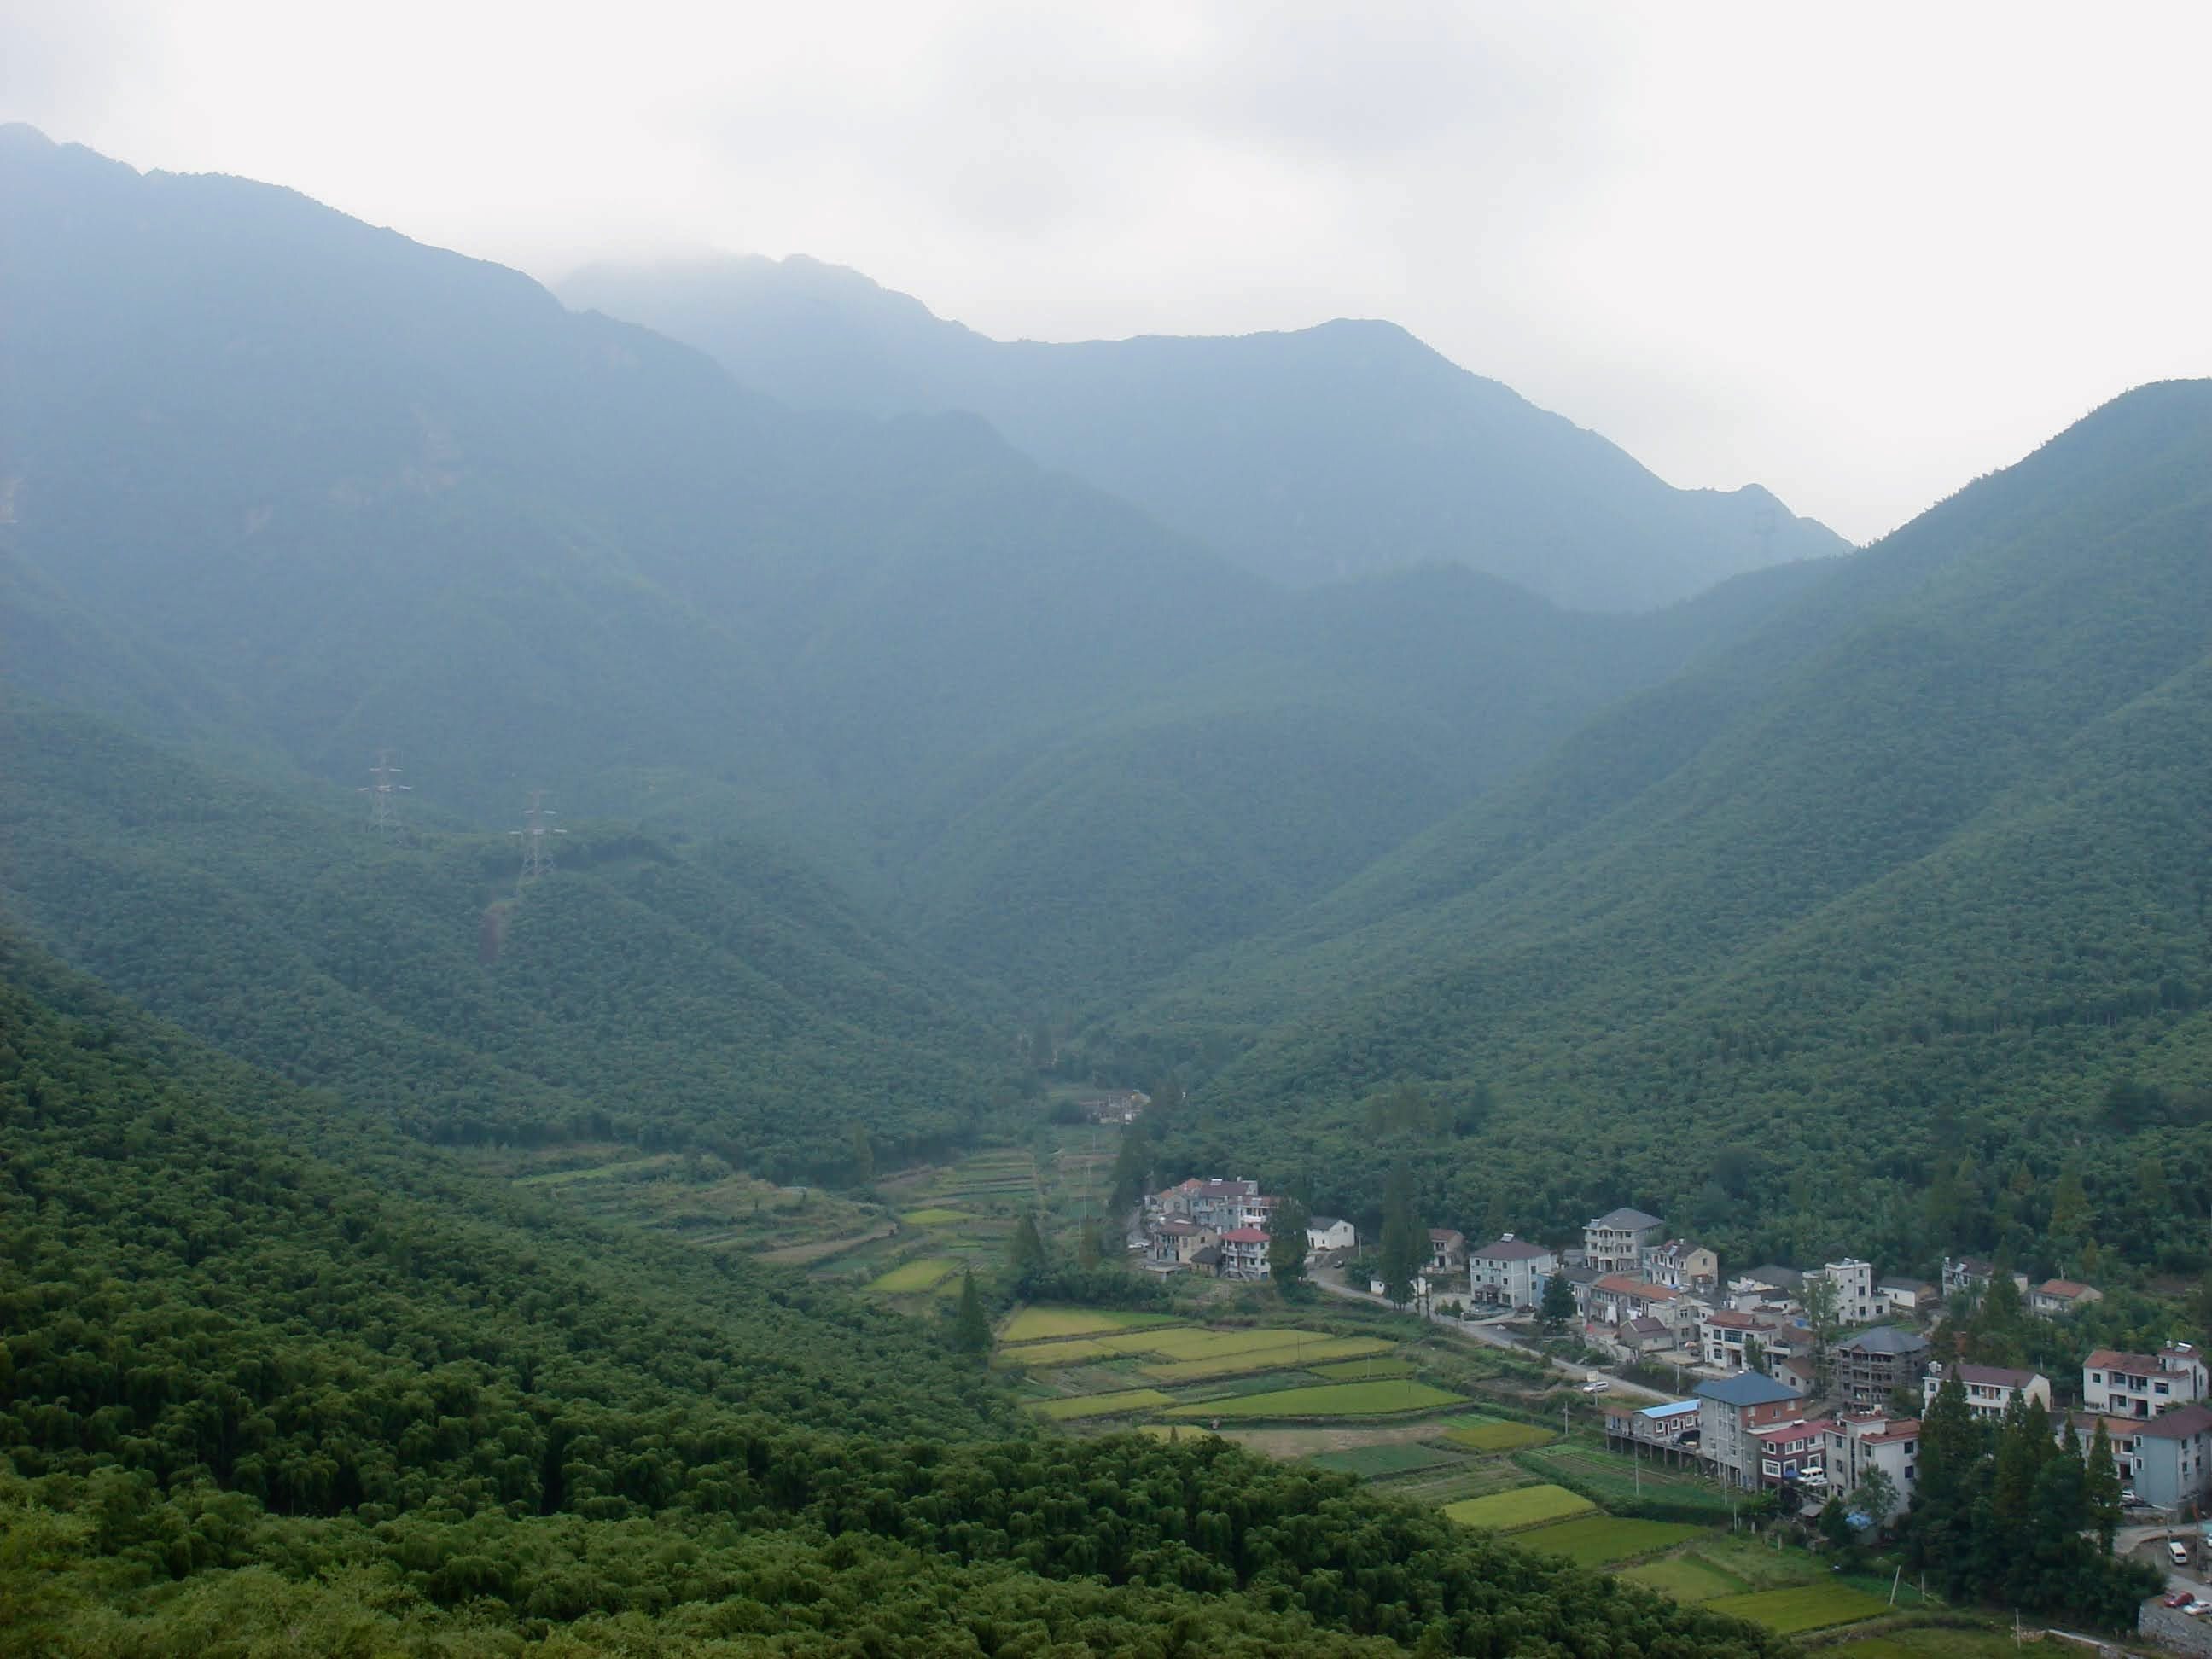 Anji in Zhejiang province, China. Megan Eaves lived in the small town, where she worked as an English teacher, in 2006, an experience that sparked a lifelong love of China. Photo: Megan Eaves